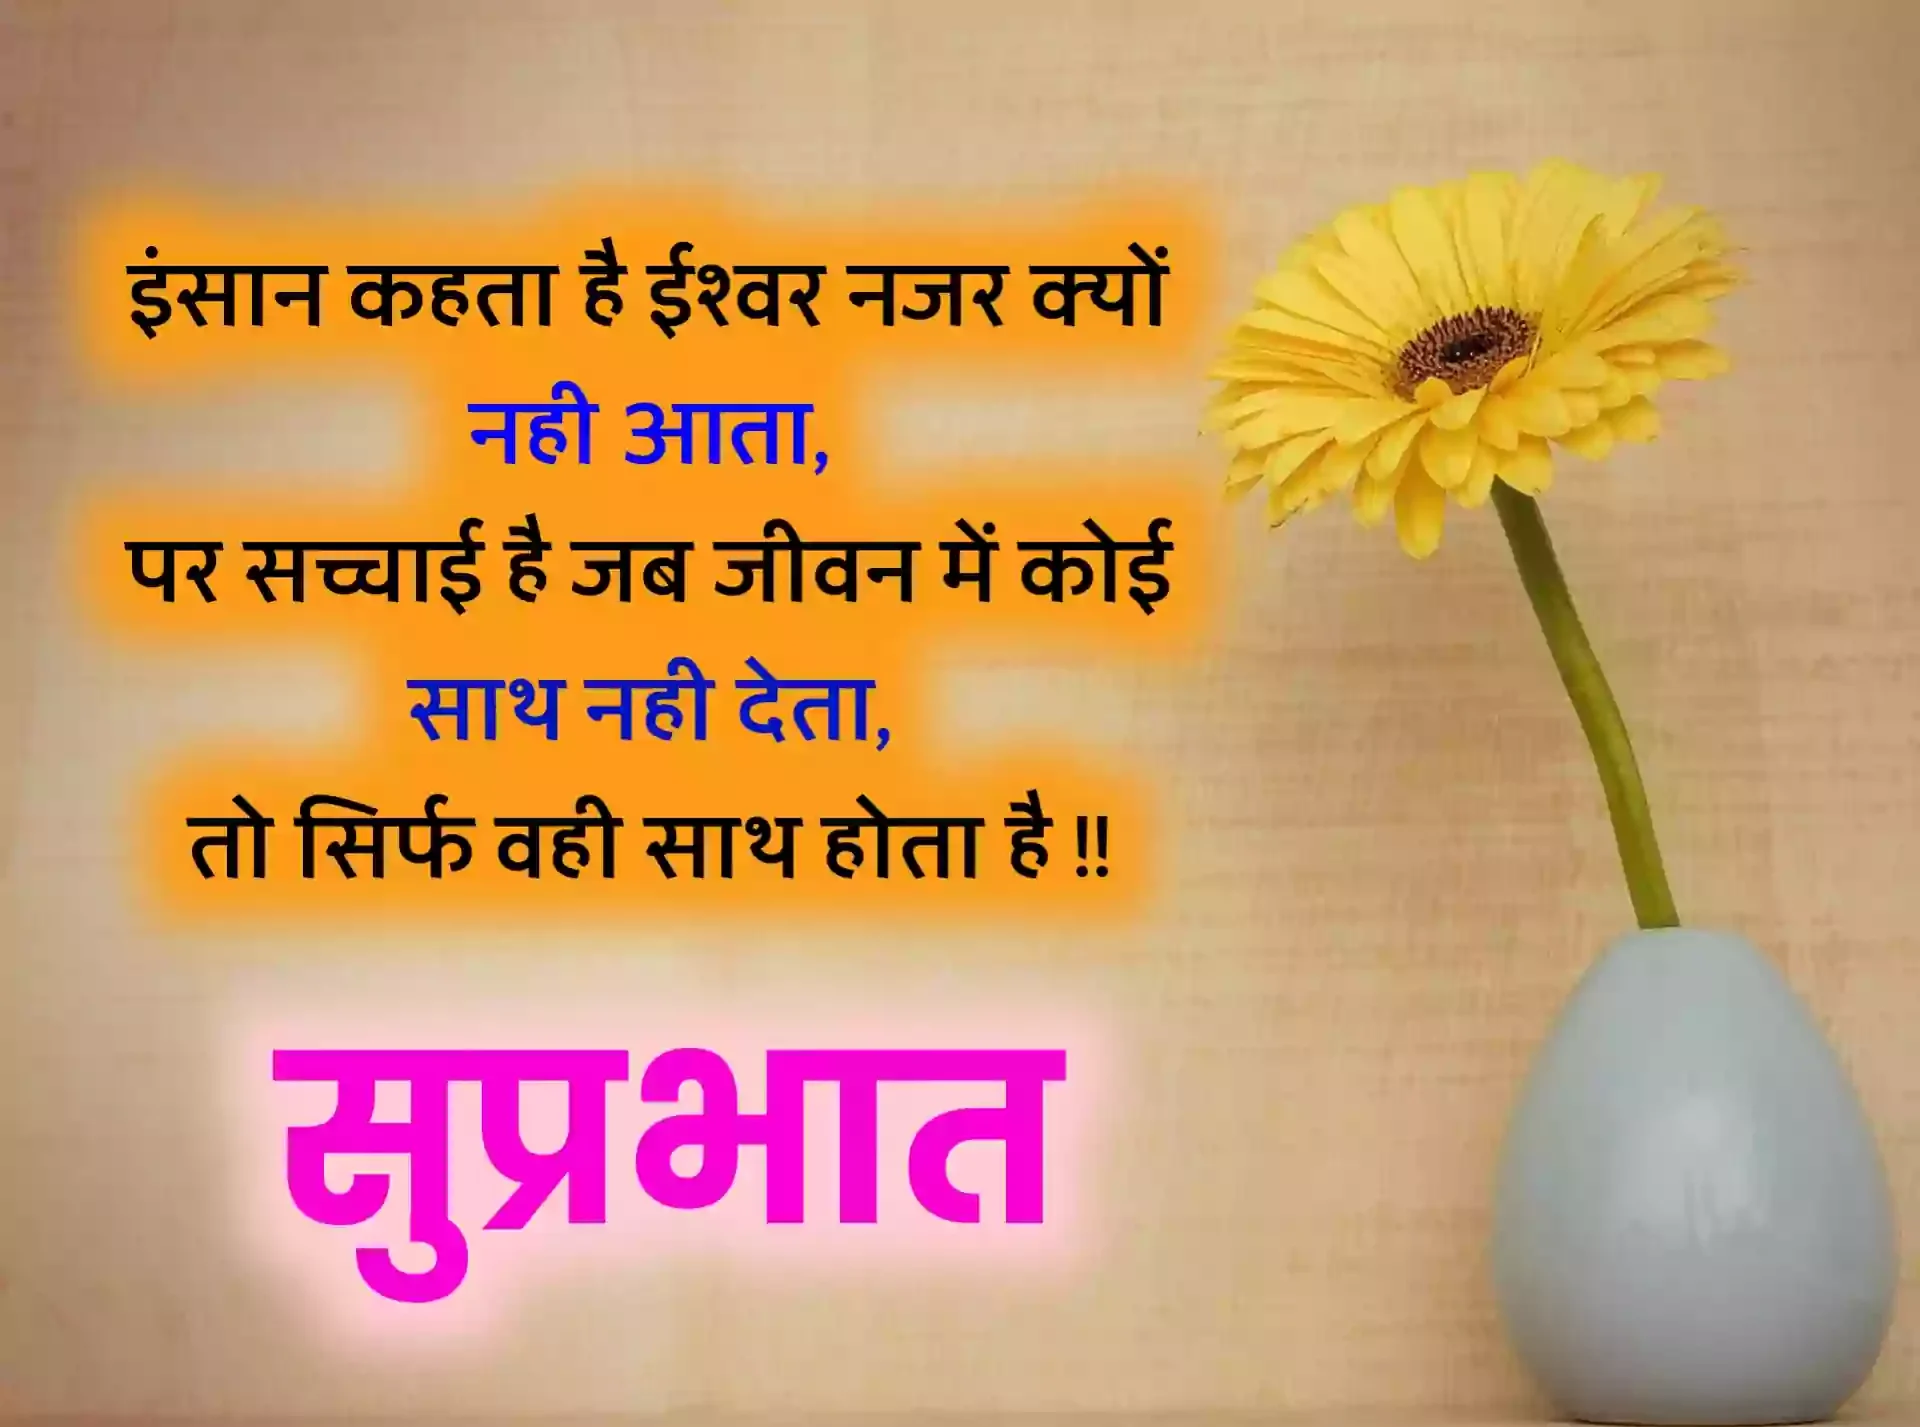 Morning Quotes in Hindi Image